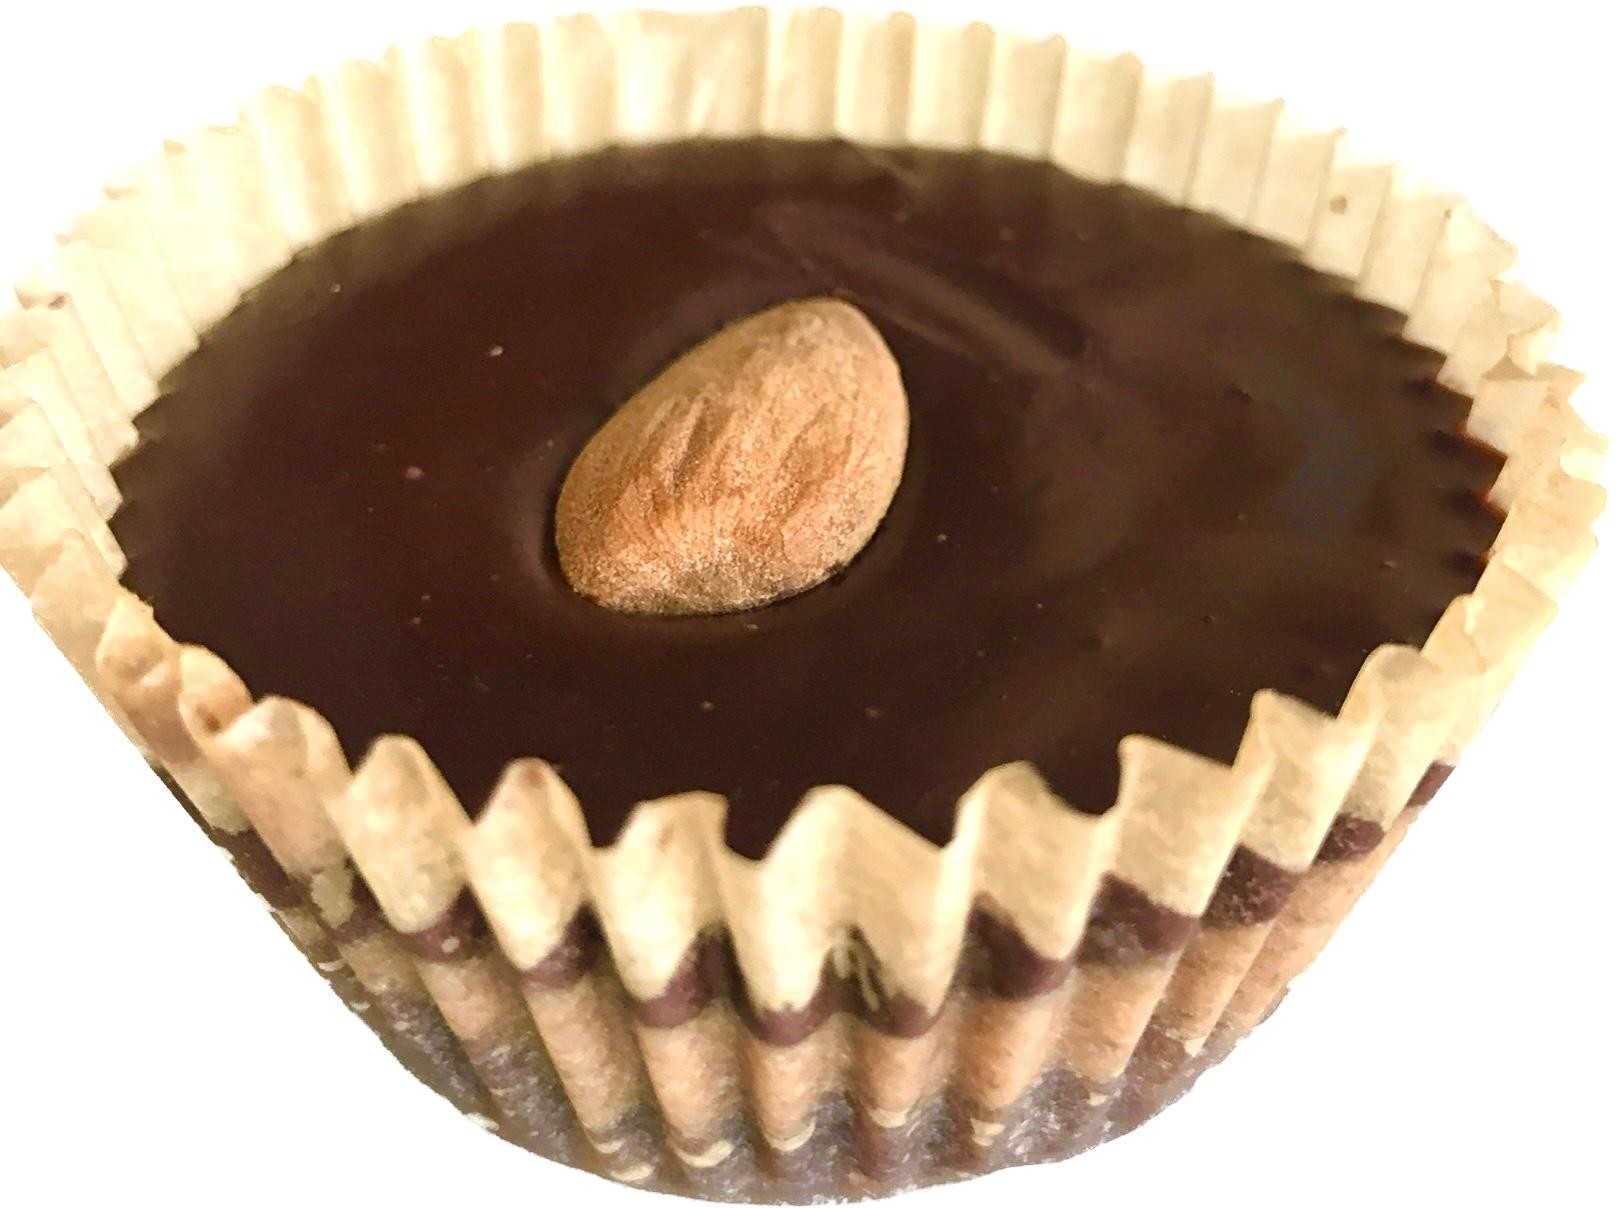 CHOCOLATE ALMOND BUTTER CUP